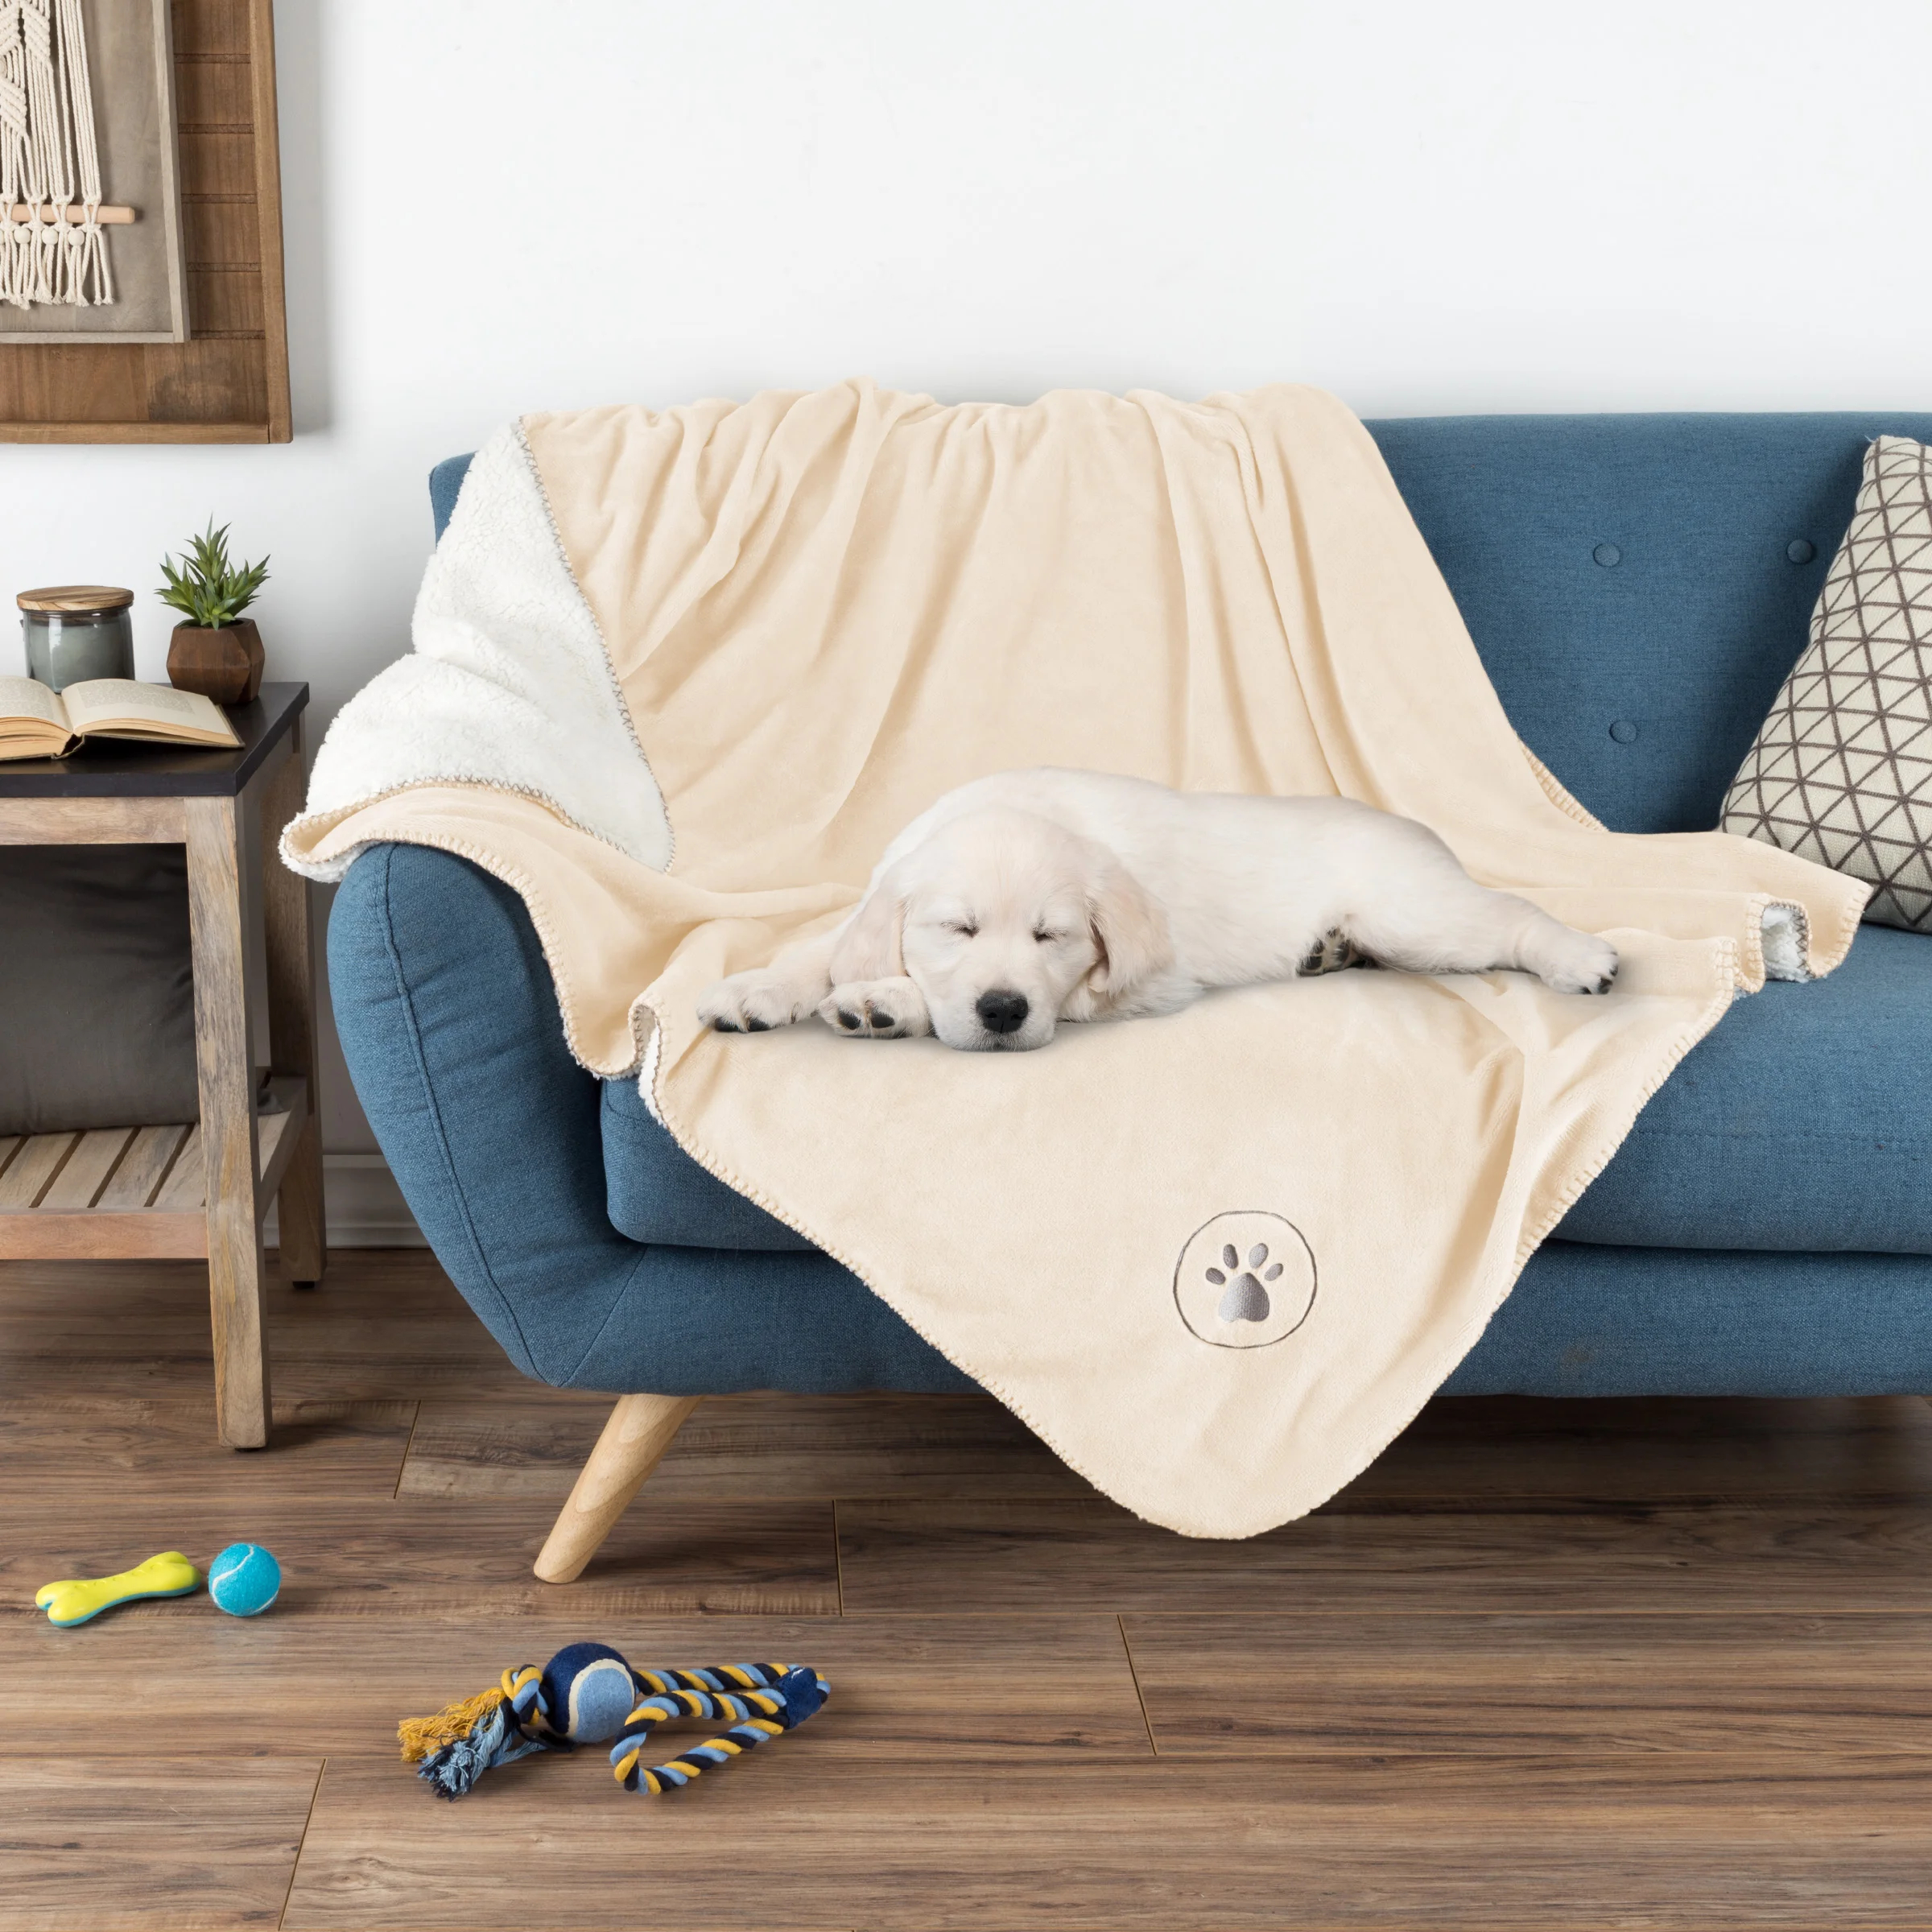 a dog on the blanket in cream over a couch